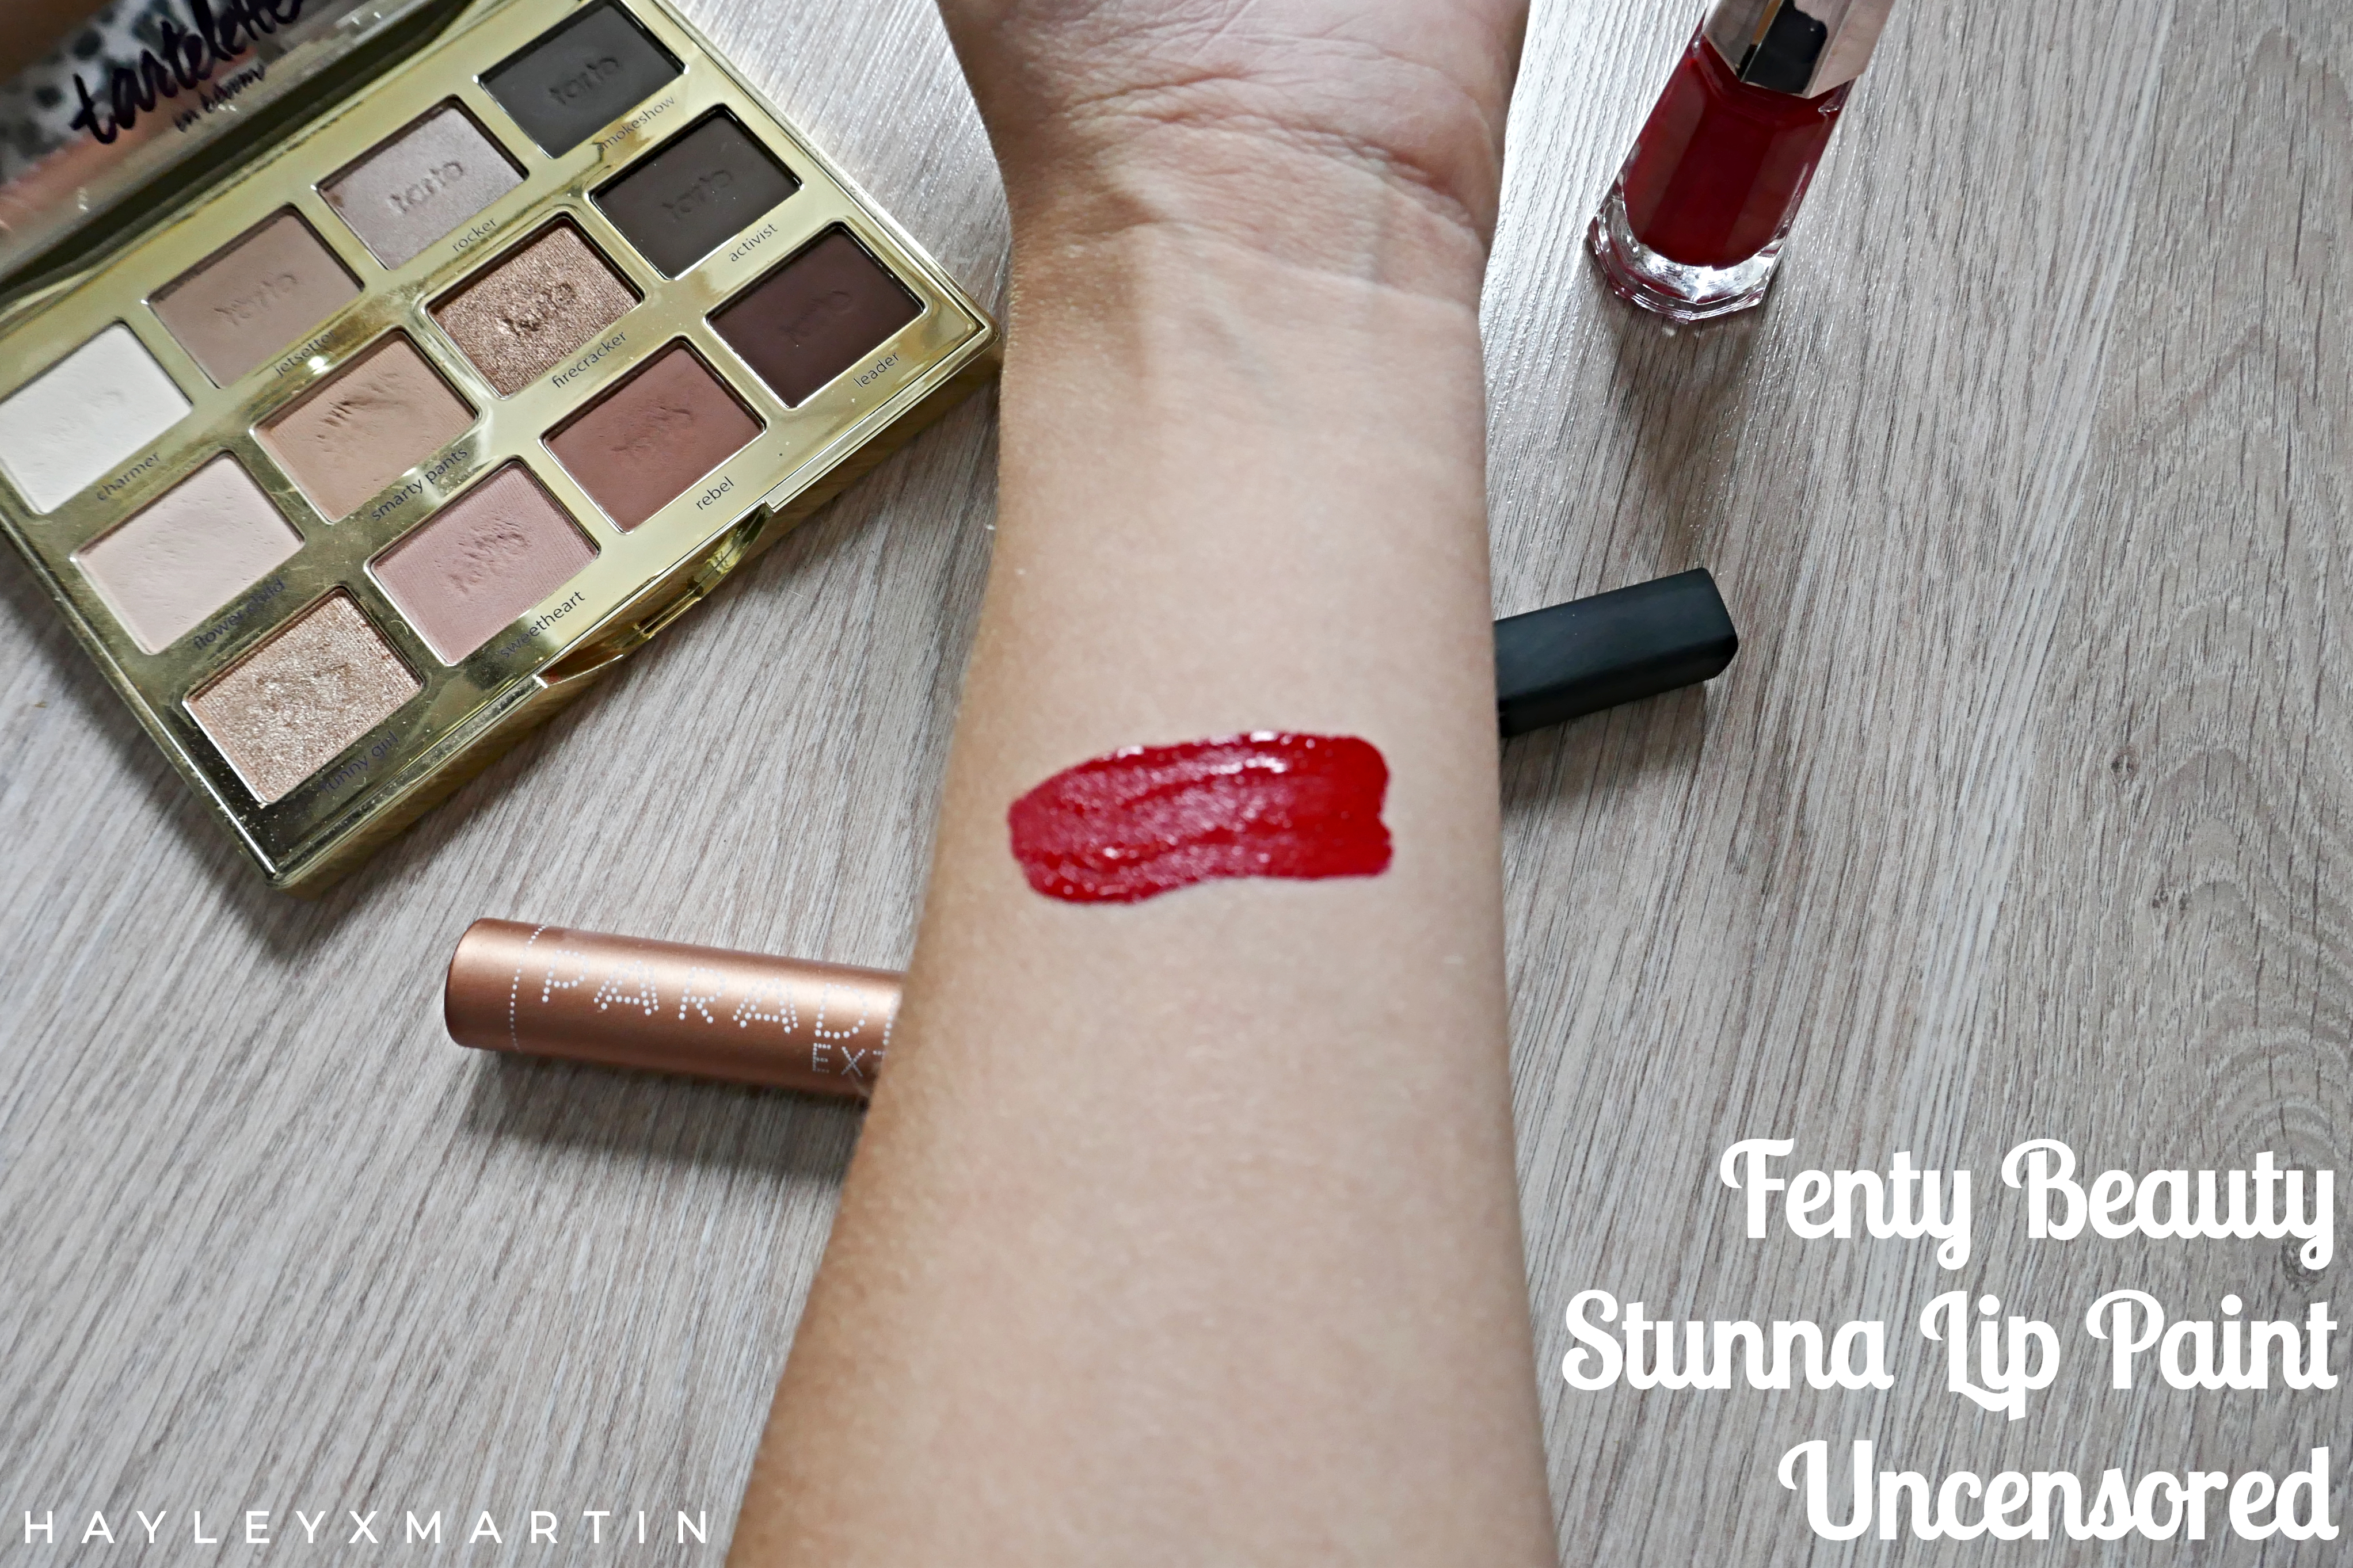 HAYLEYXMARTIN _ FENTY BEAUTY STUNNA LIP PAINT UNCENSORED REVIEW & SWATCHES